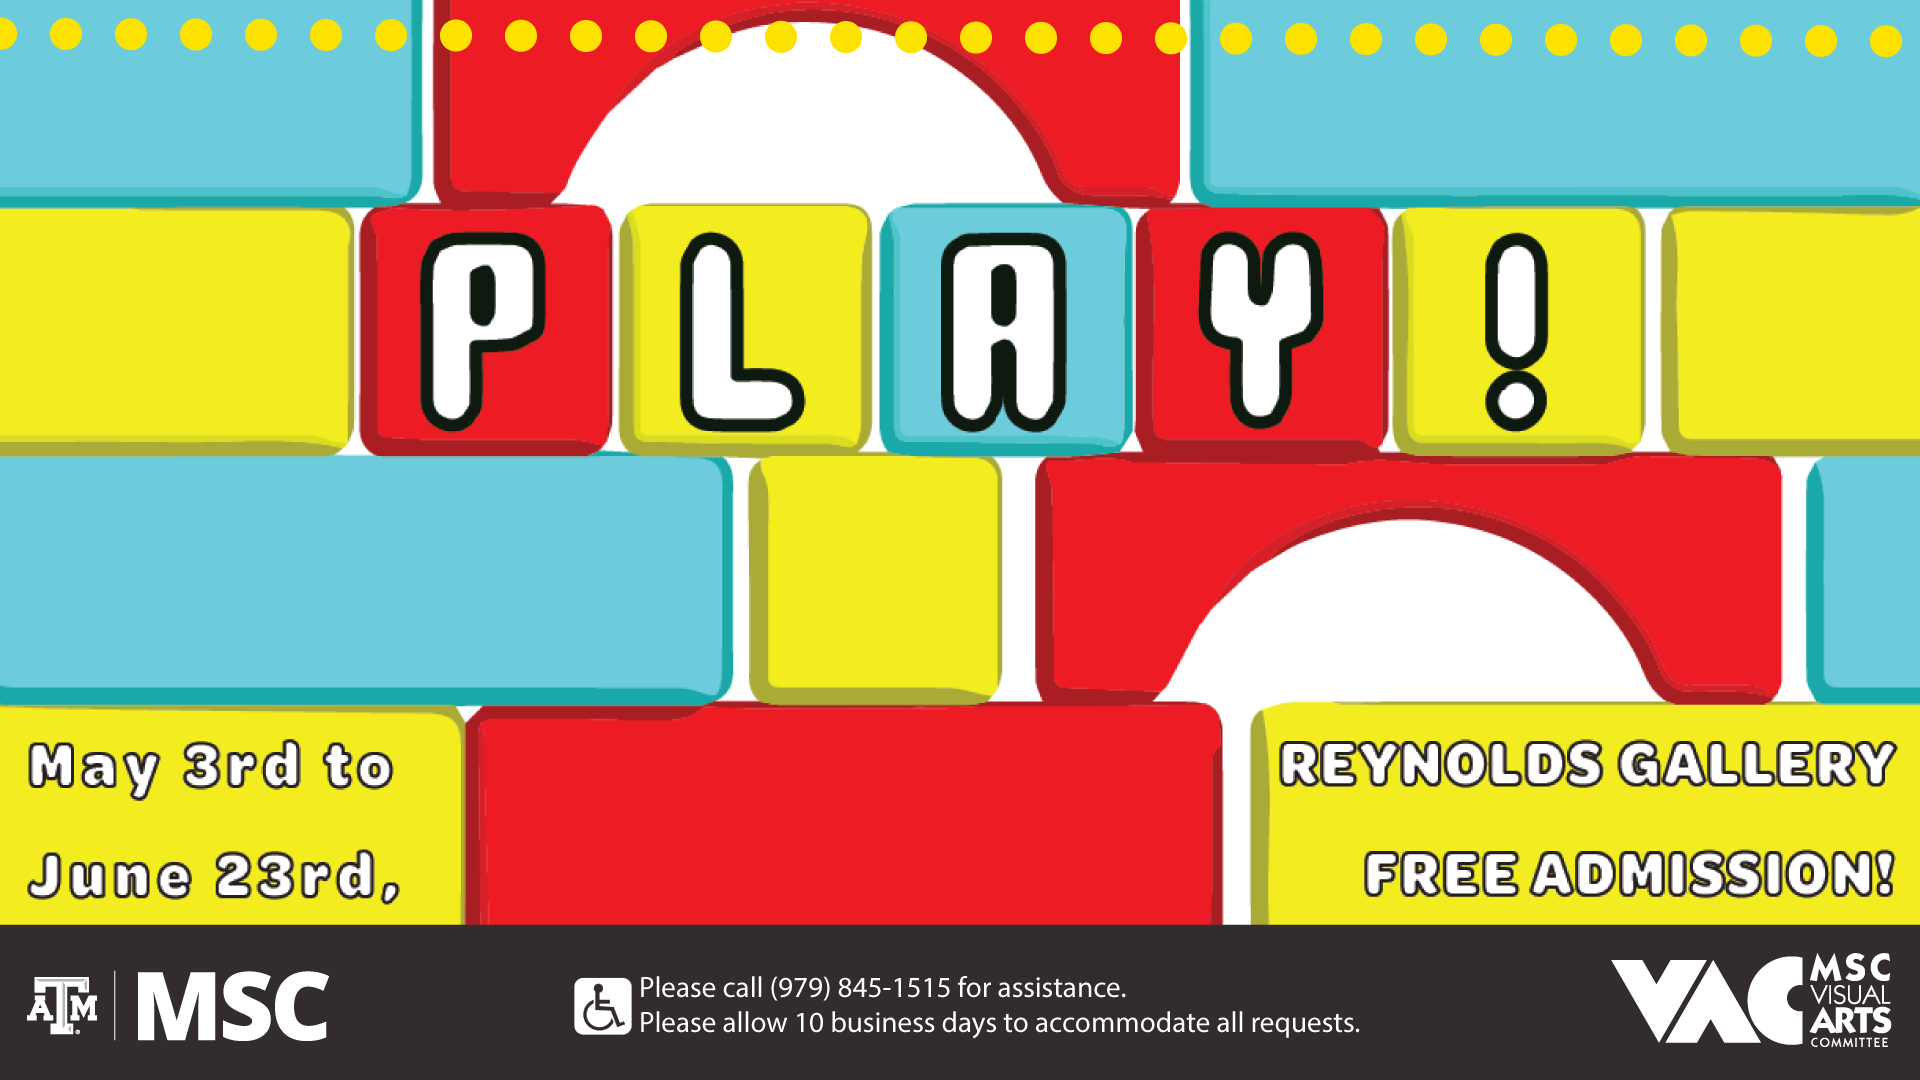 MSC VAC presents Play, May 3rd to June 23rd, Free Admission at Reynolds Gallery